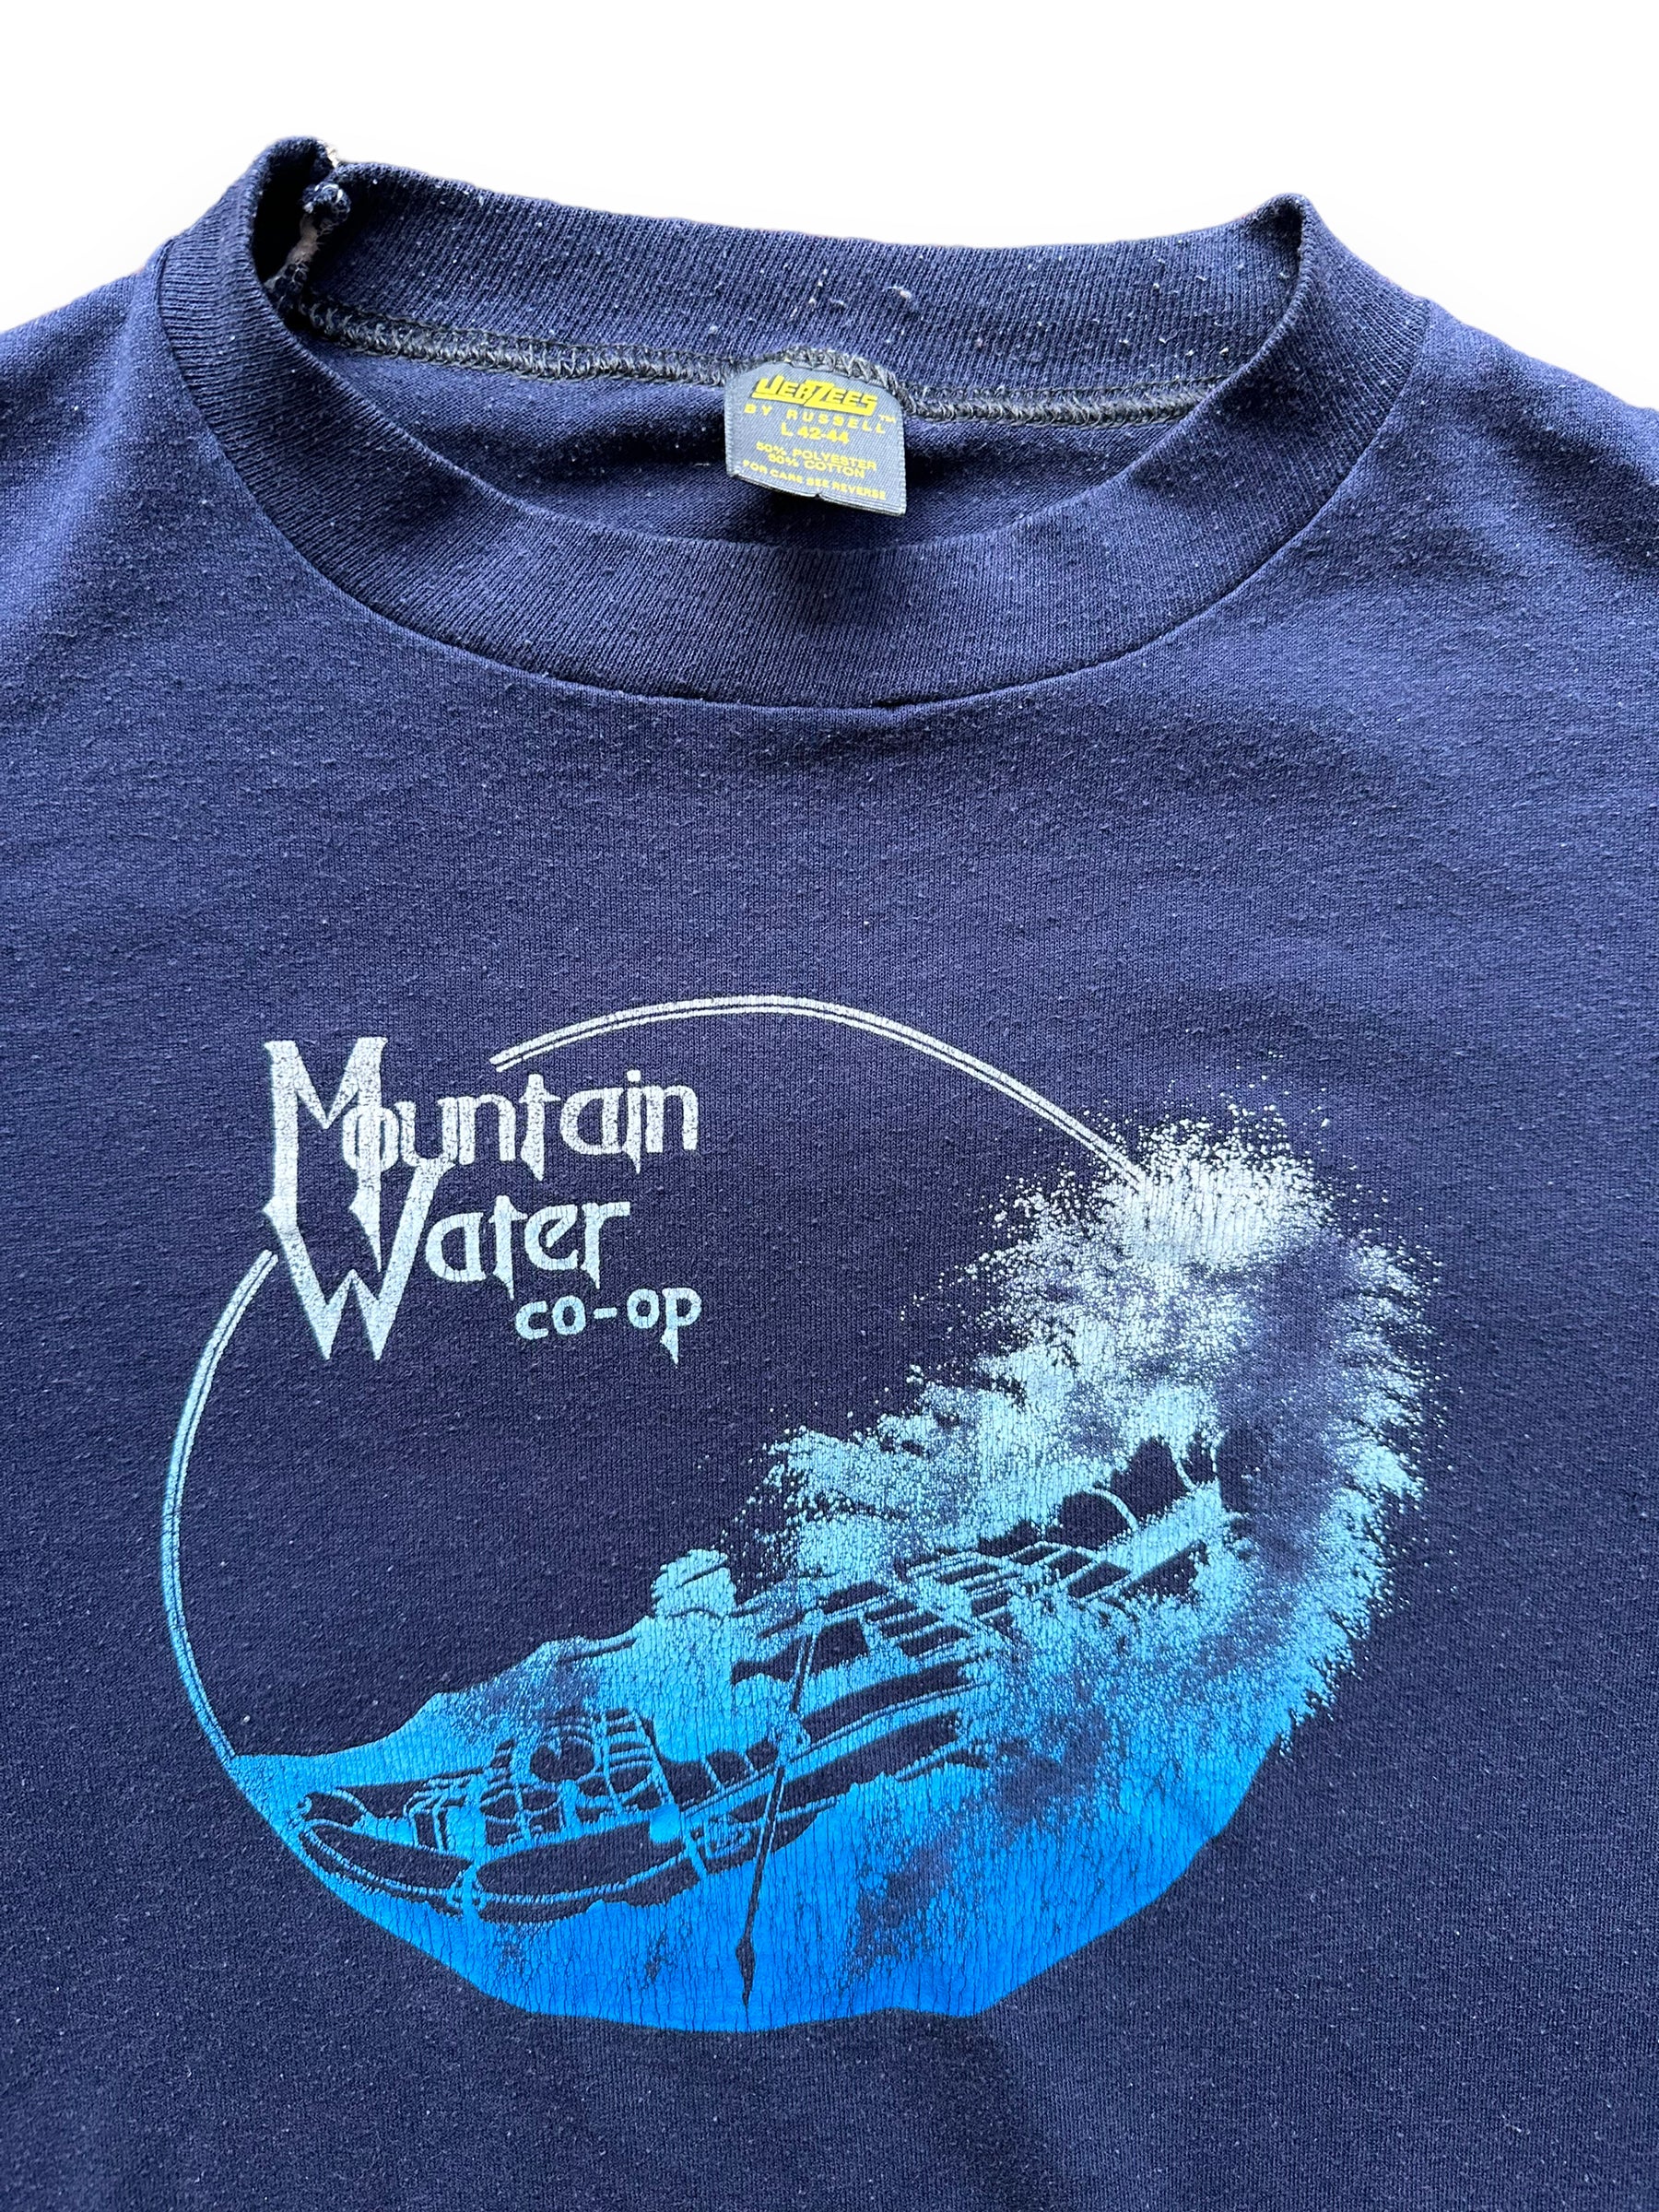 Front Graphic Detail on Vintage Mountain Water Co-op Tee SZ L | Vintage Graphic T-Shirts Seattle | Barn Owl Vintage Tees Seattle